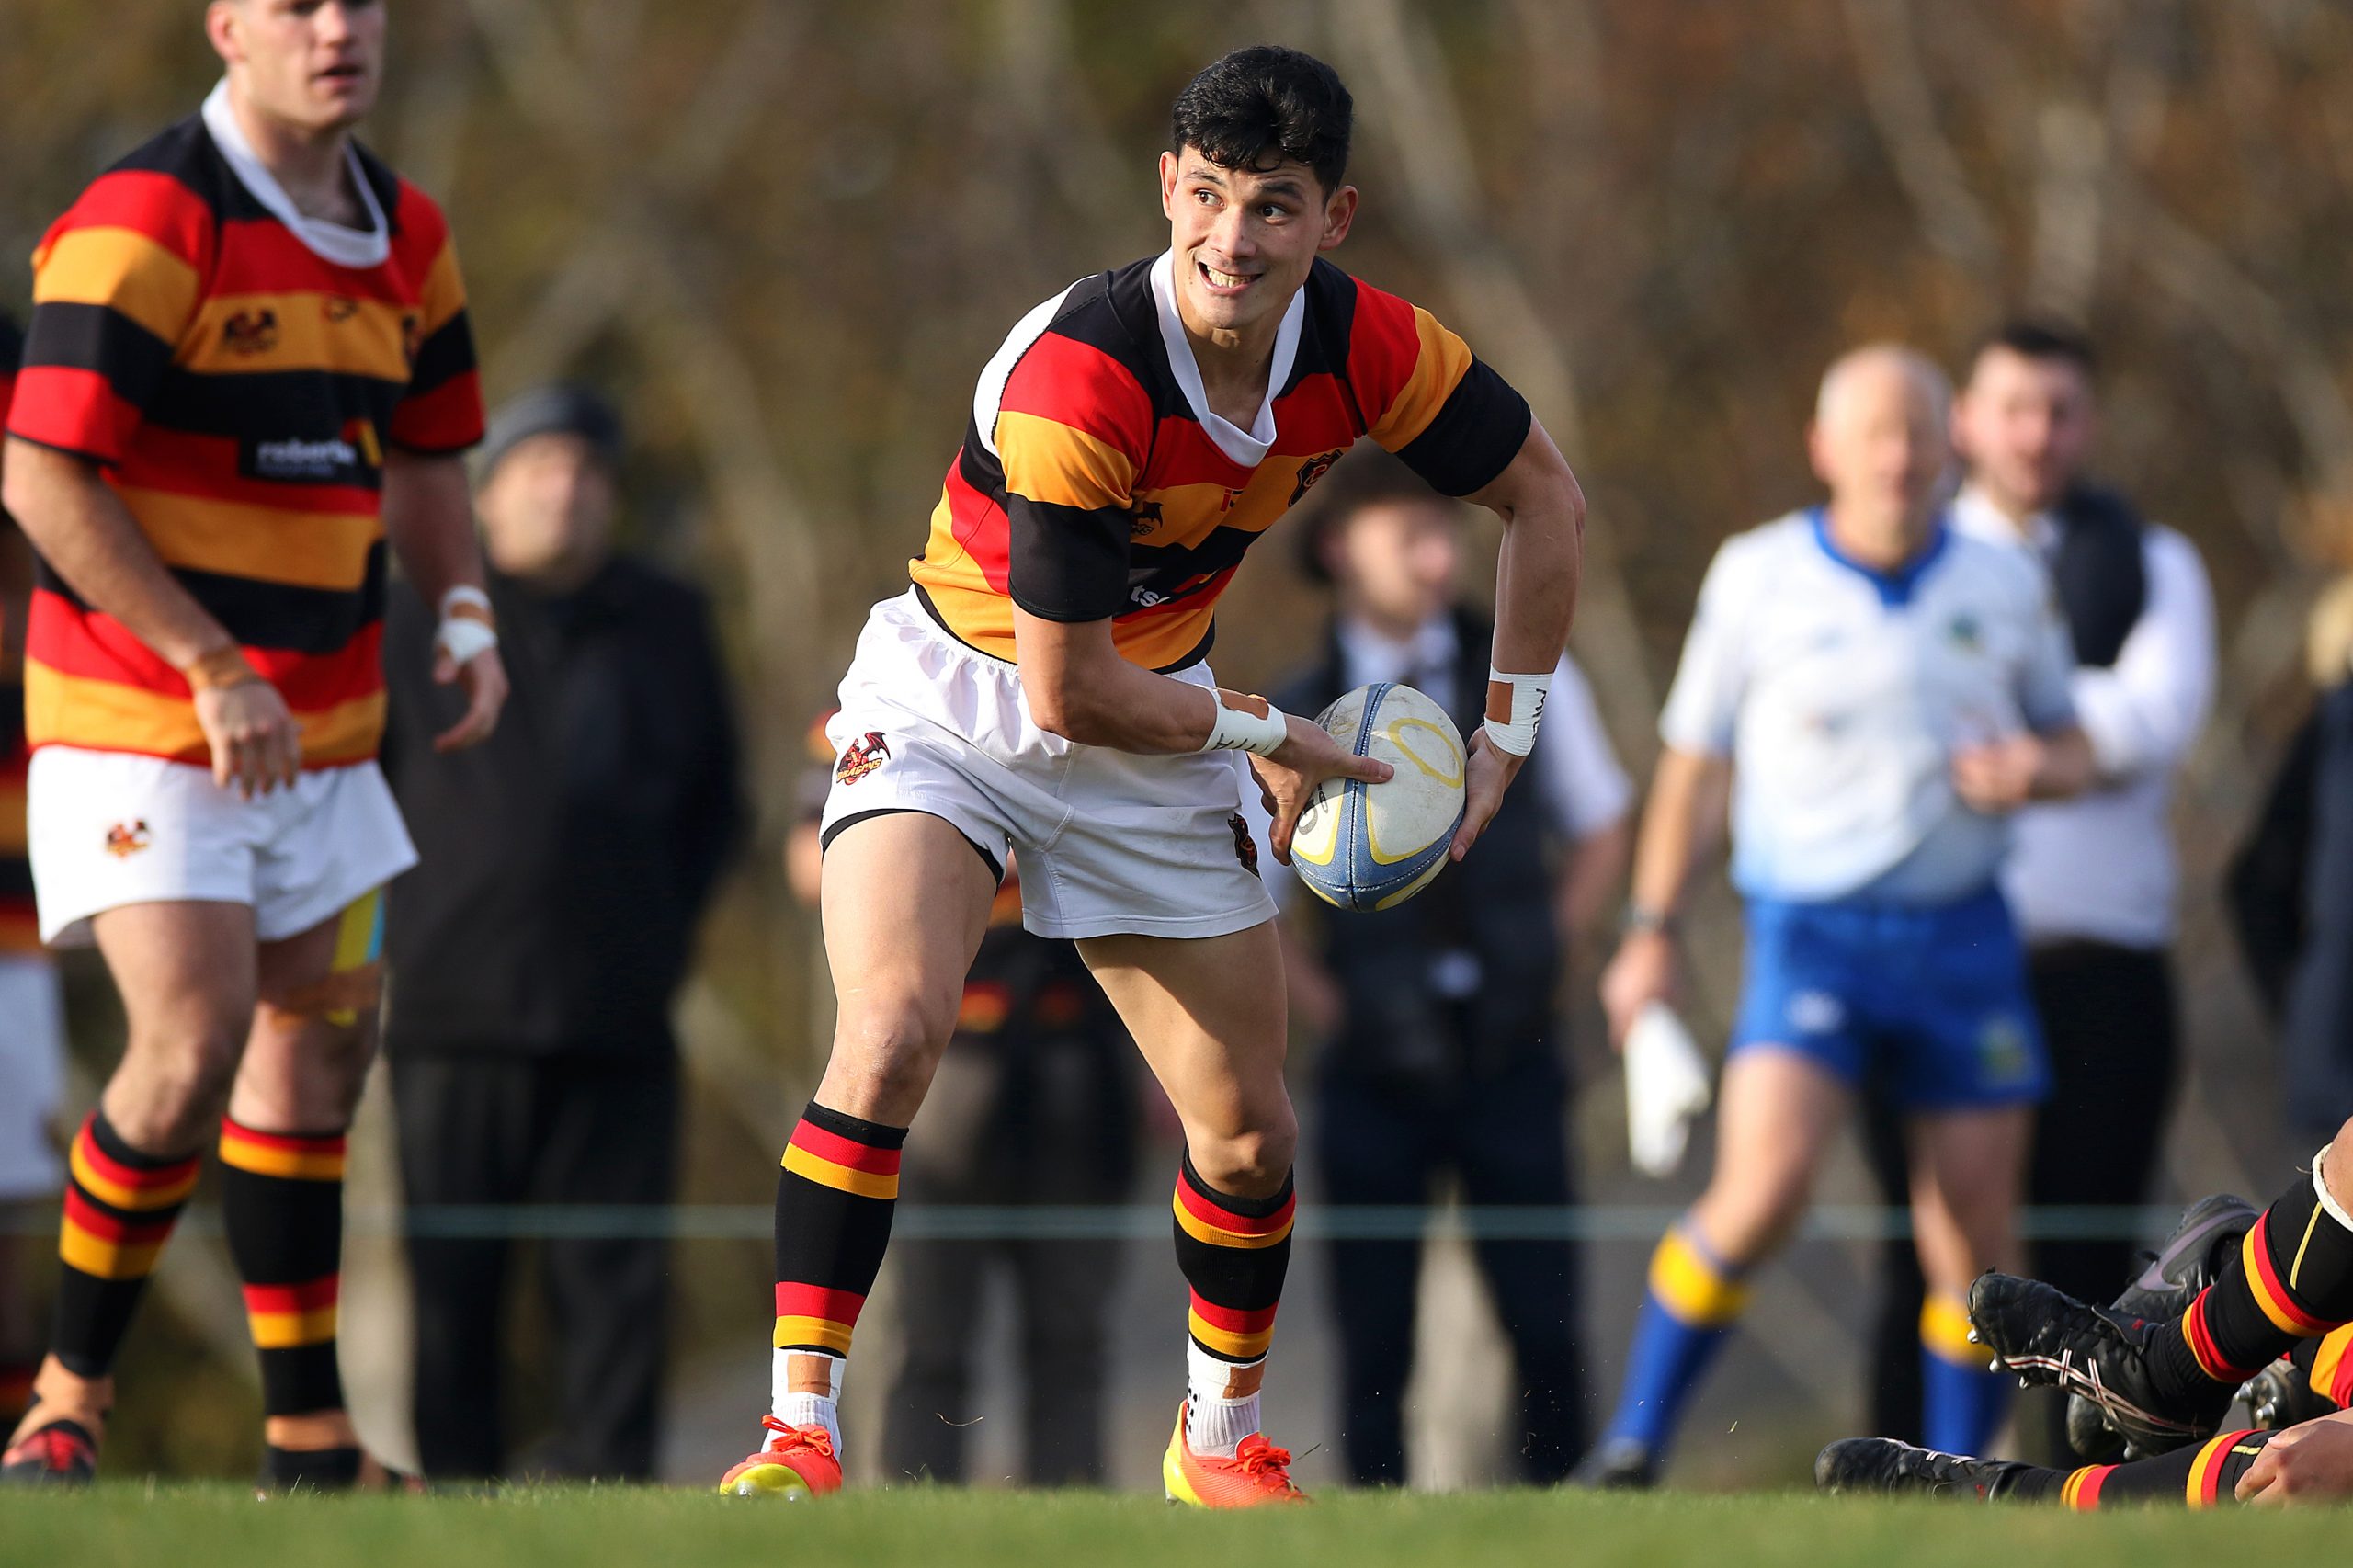 Jin Ho Mun of Zingari Richmond throws a pass during the Premier club rugby match between Zingari Richmond and Alhambra Union played for the Grace Mills Trophy at Montecillo in Dunedin on Saturday 28th May, 2022. © John Caswell / http://www.caswellimages.com